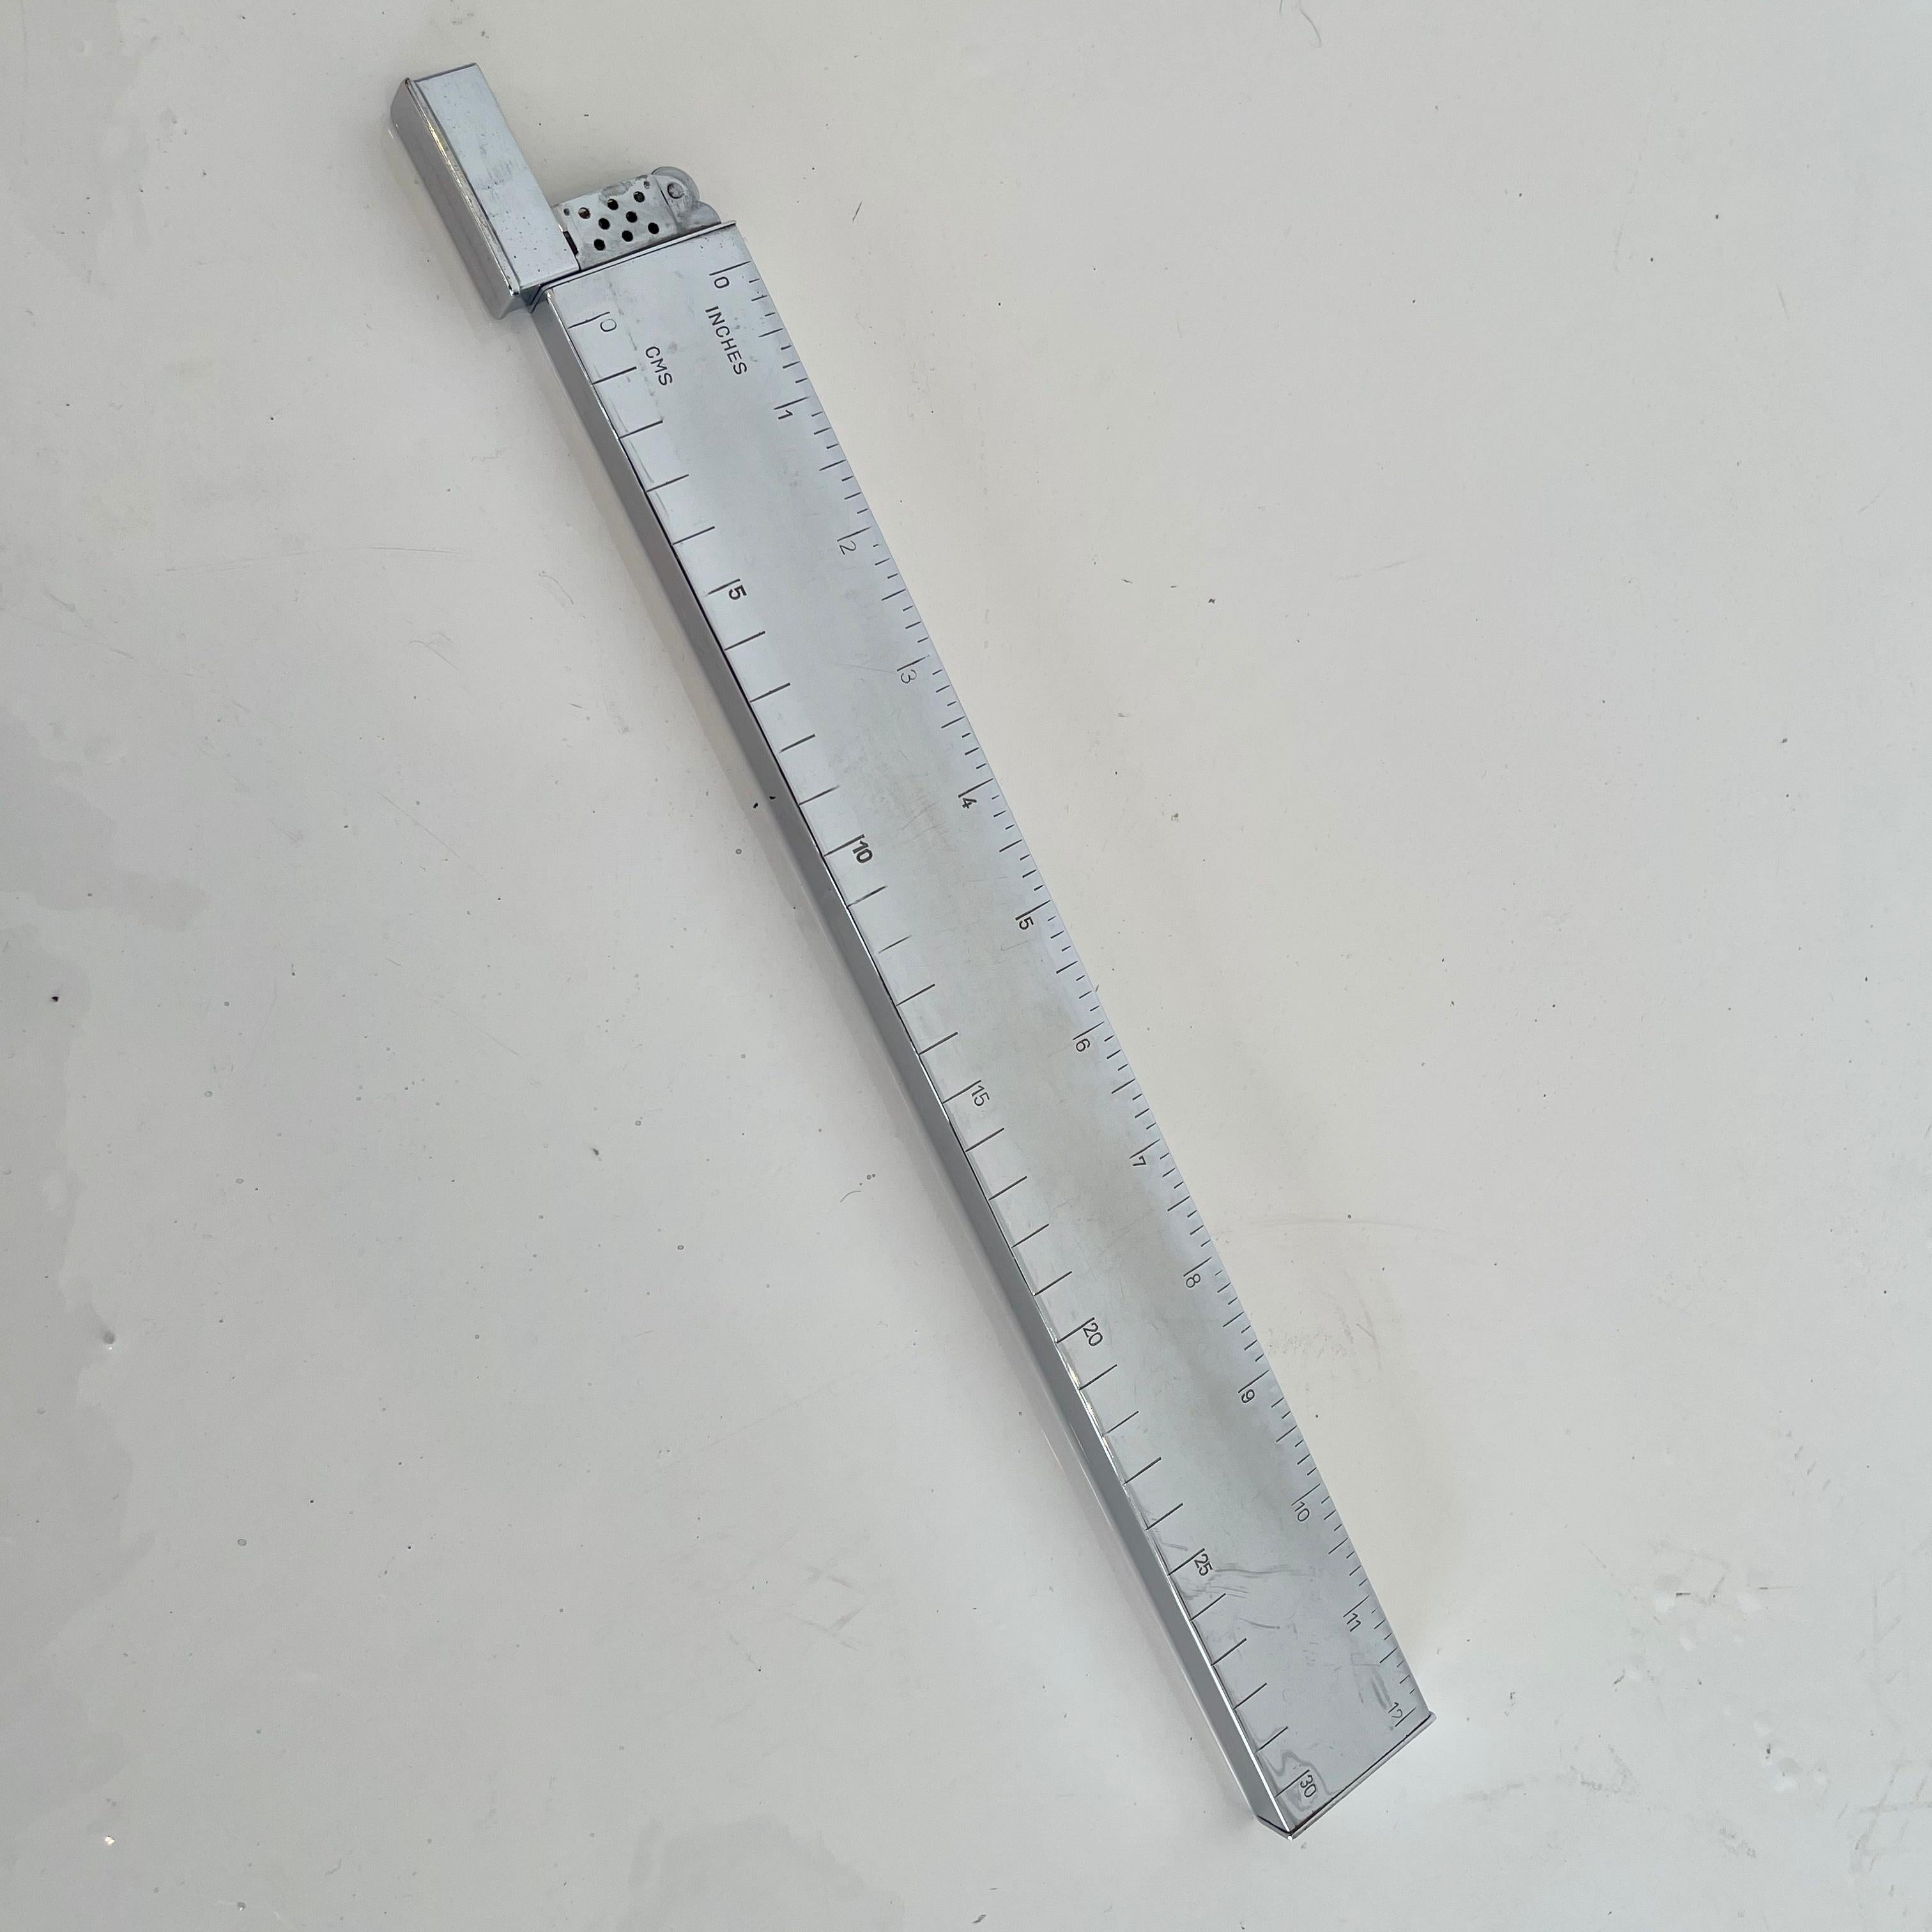 Cool vintage chrome 1 foot ruler with hidden lighter. Functional ruler and functional lighter with spark and flame. Fun conversation piece and tabletop object. Good vintage condition.